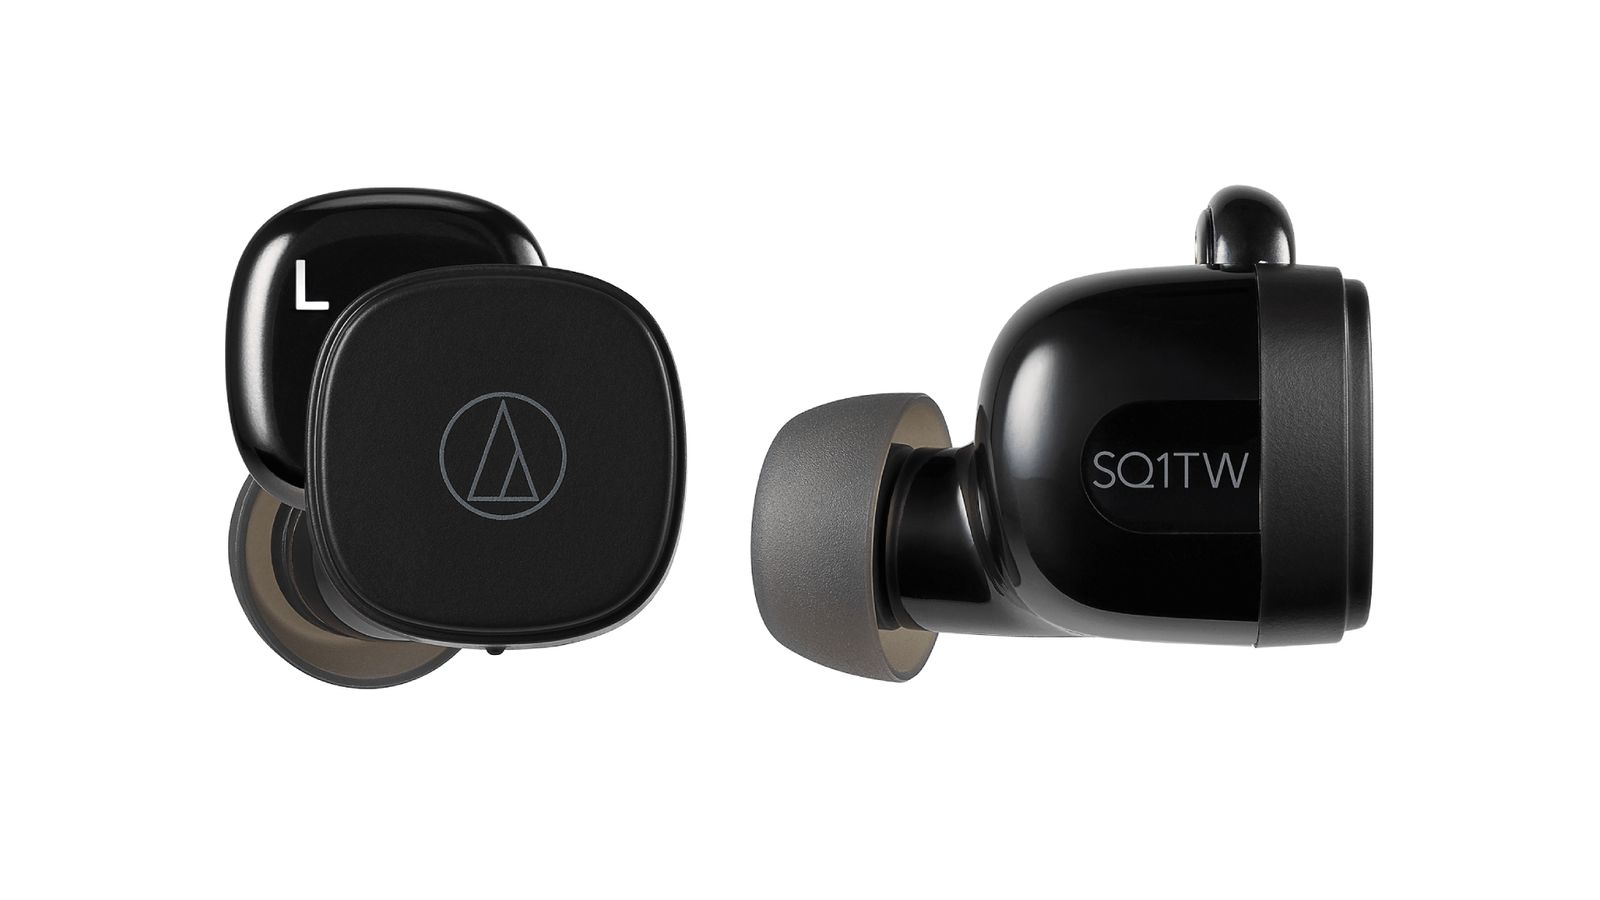 Best budget earbuds - Audio-Technica ATH-SQ1TW product image of two black square-shaped wireless earbuds.